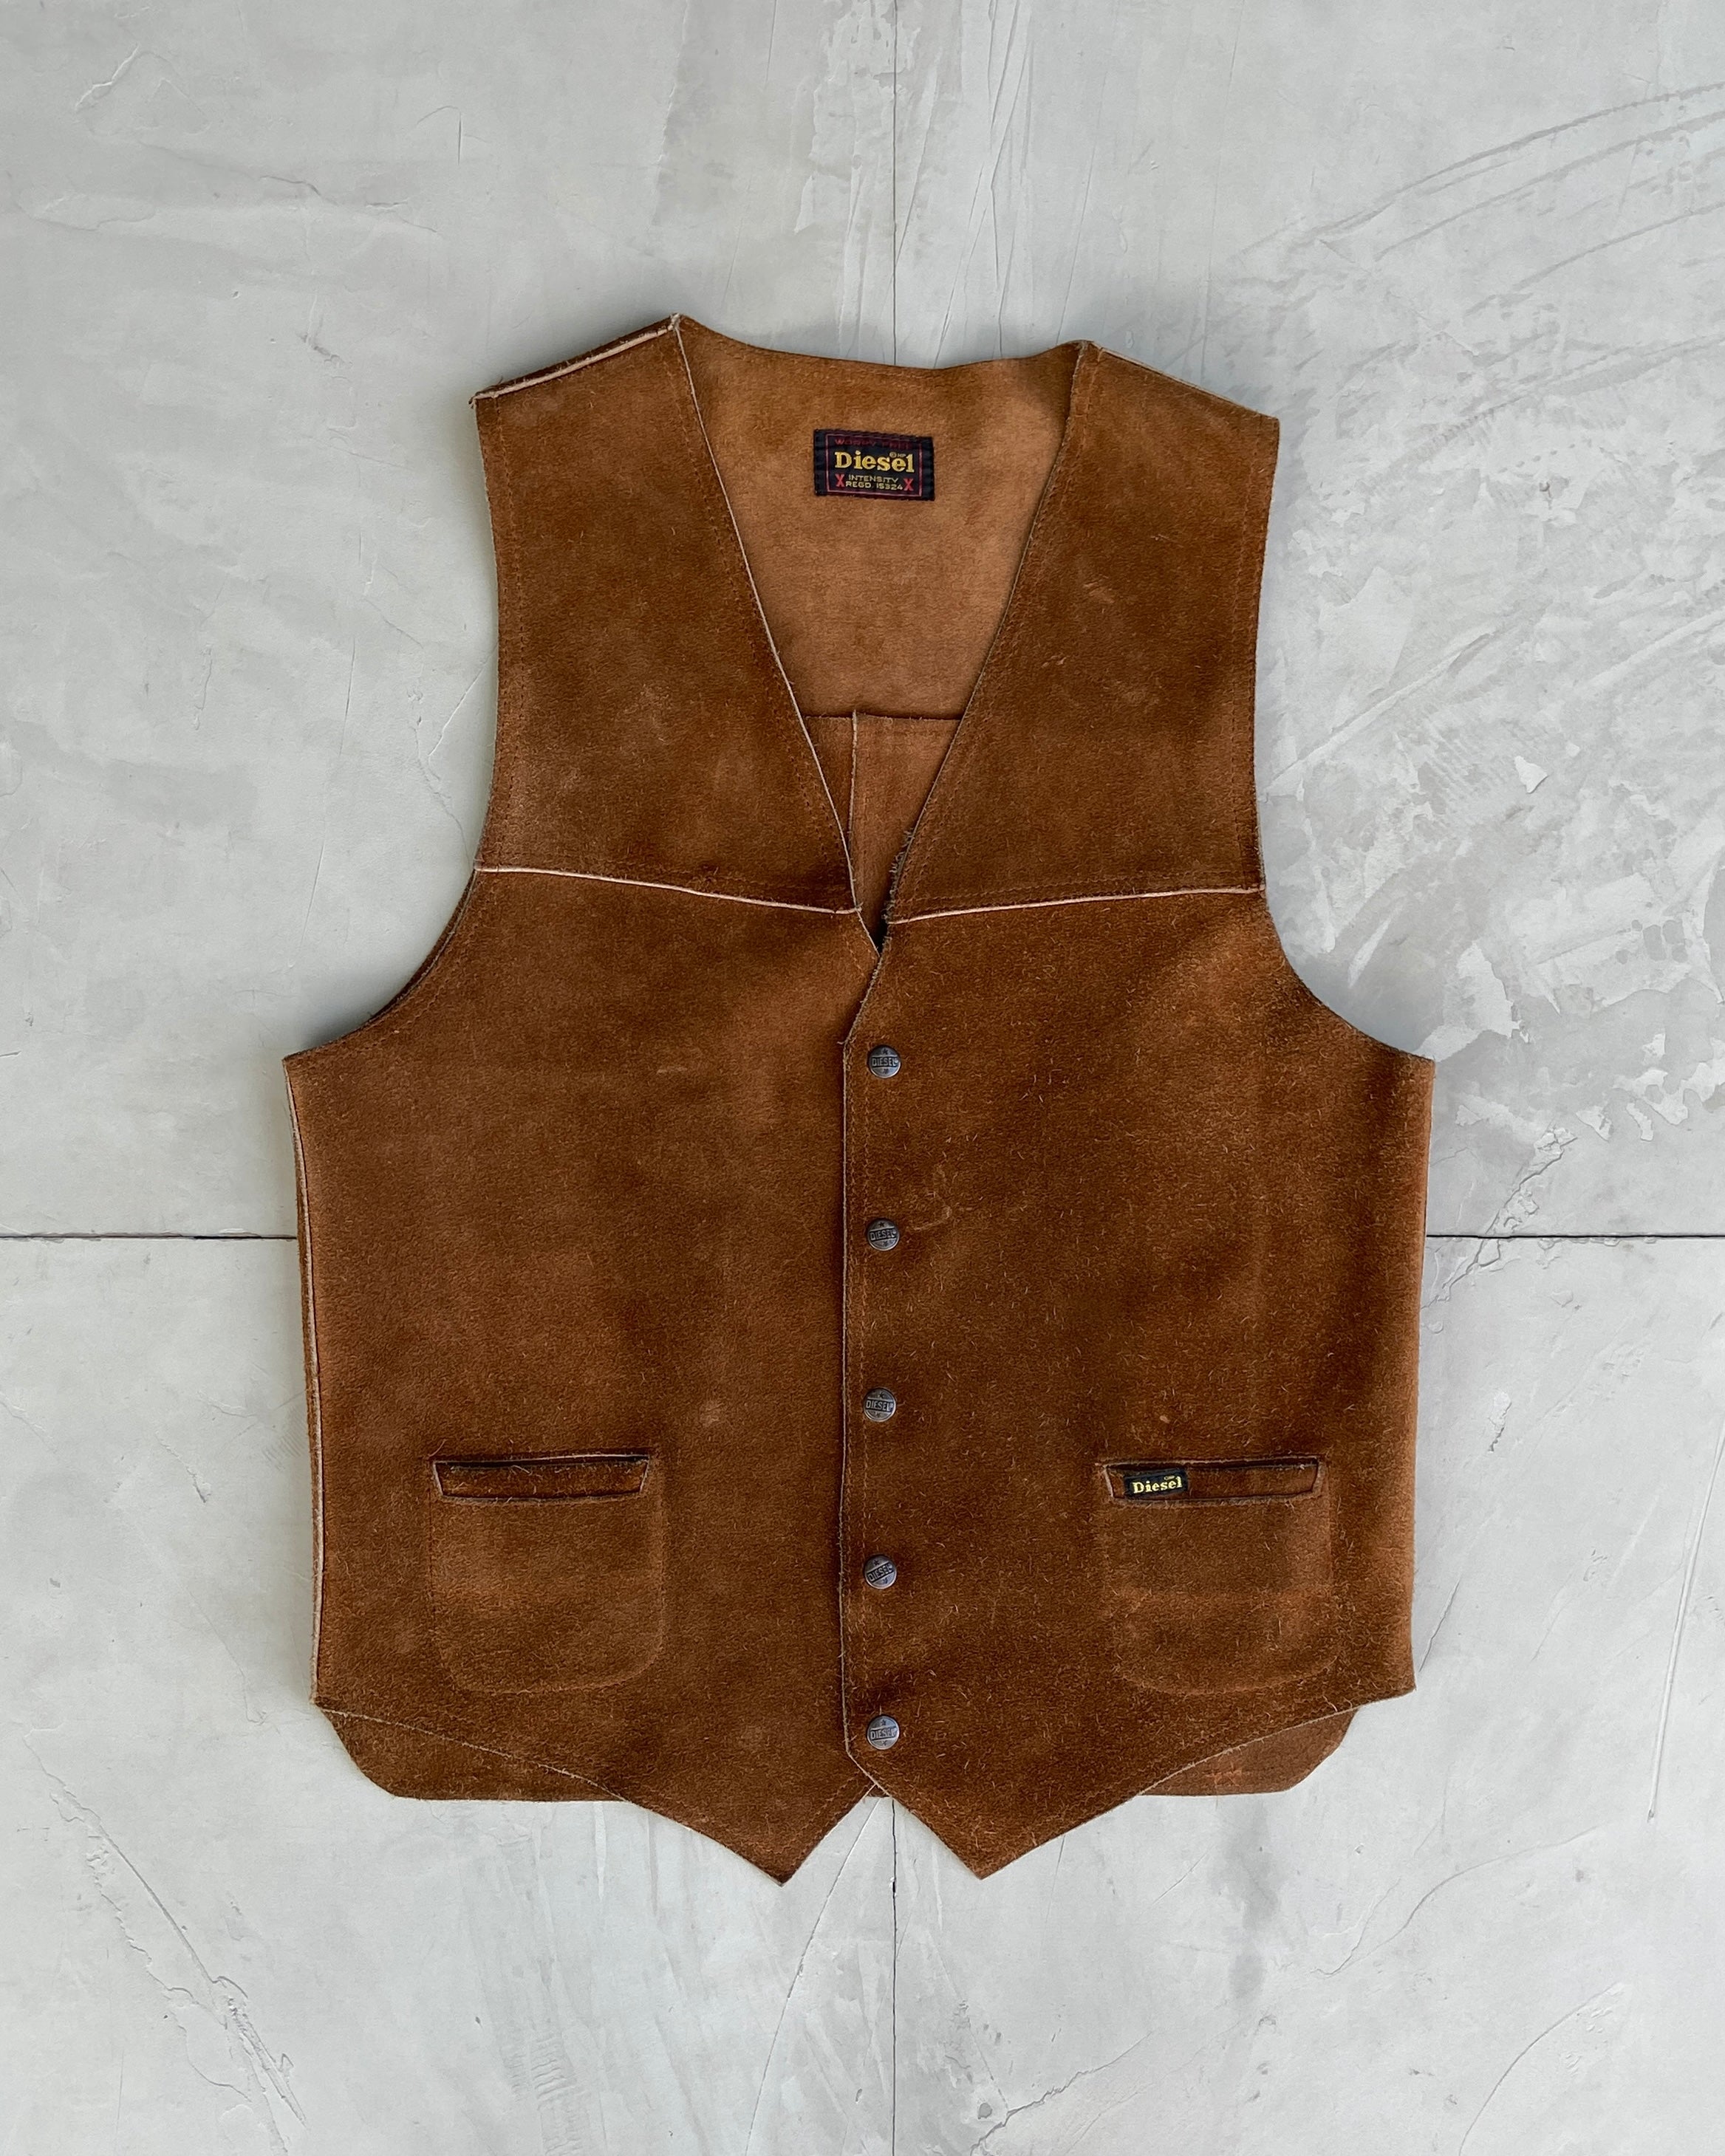 DIESEL 2000'S SUEDE LEATHER WAISTCOAT JACKET - L – BAD MOUTH*